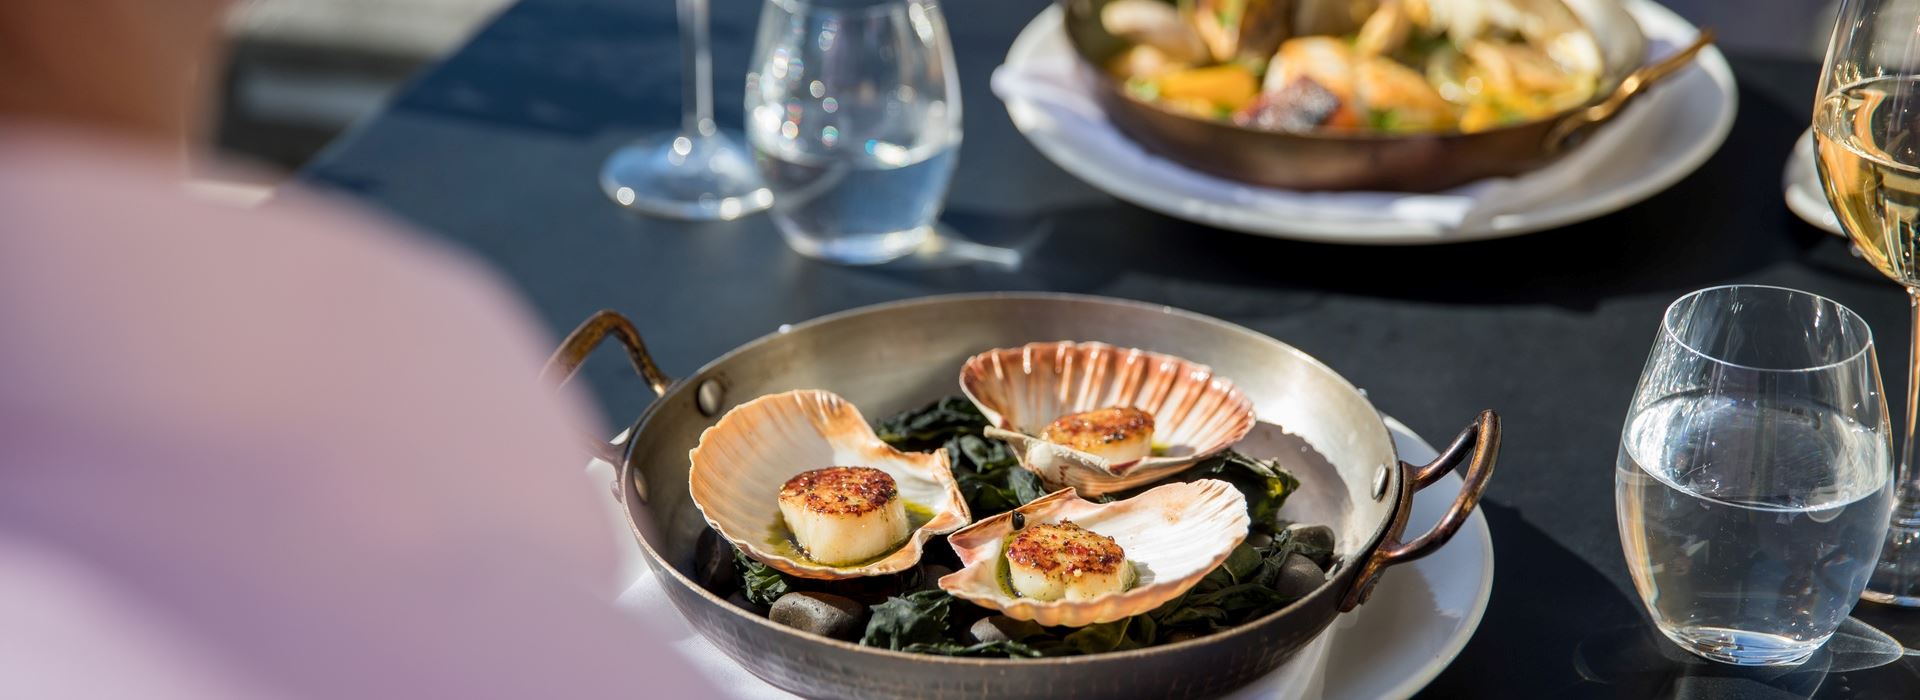 14-Day Tantalize your tastebuds on a gourmet journey through New Zealand